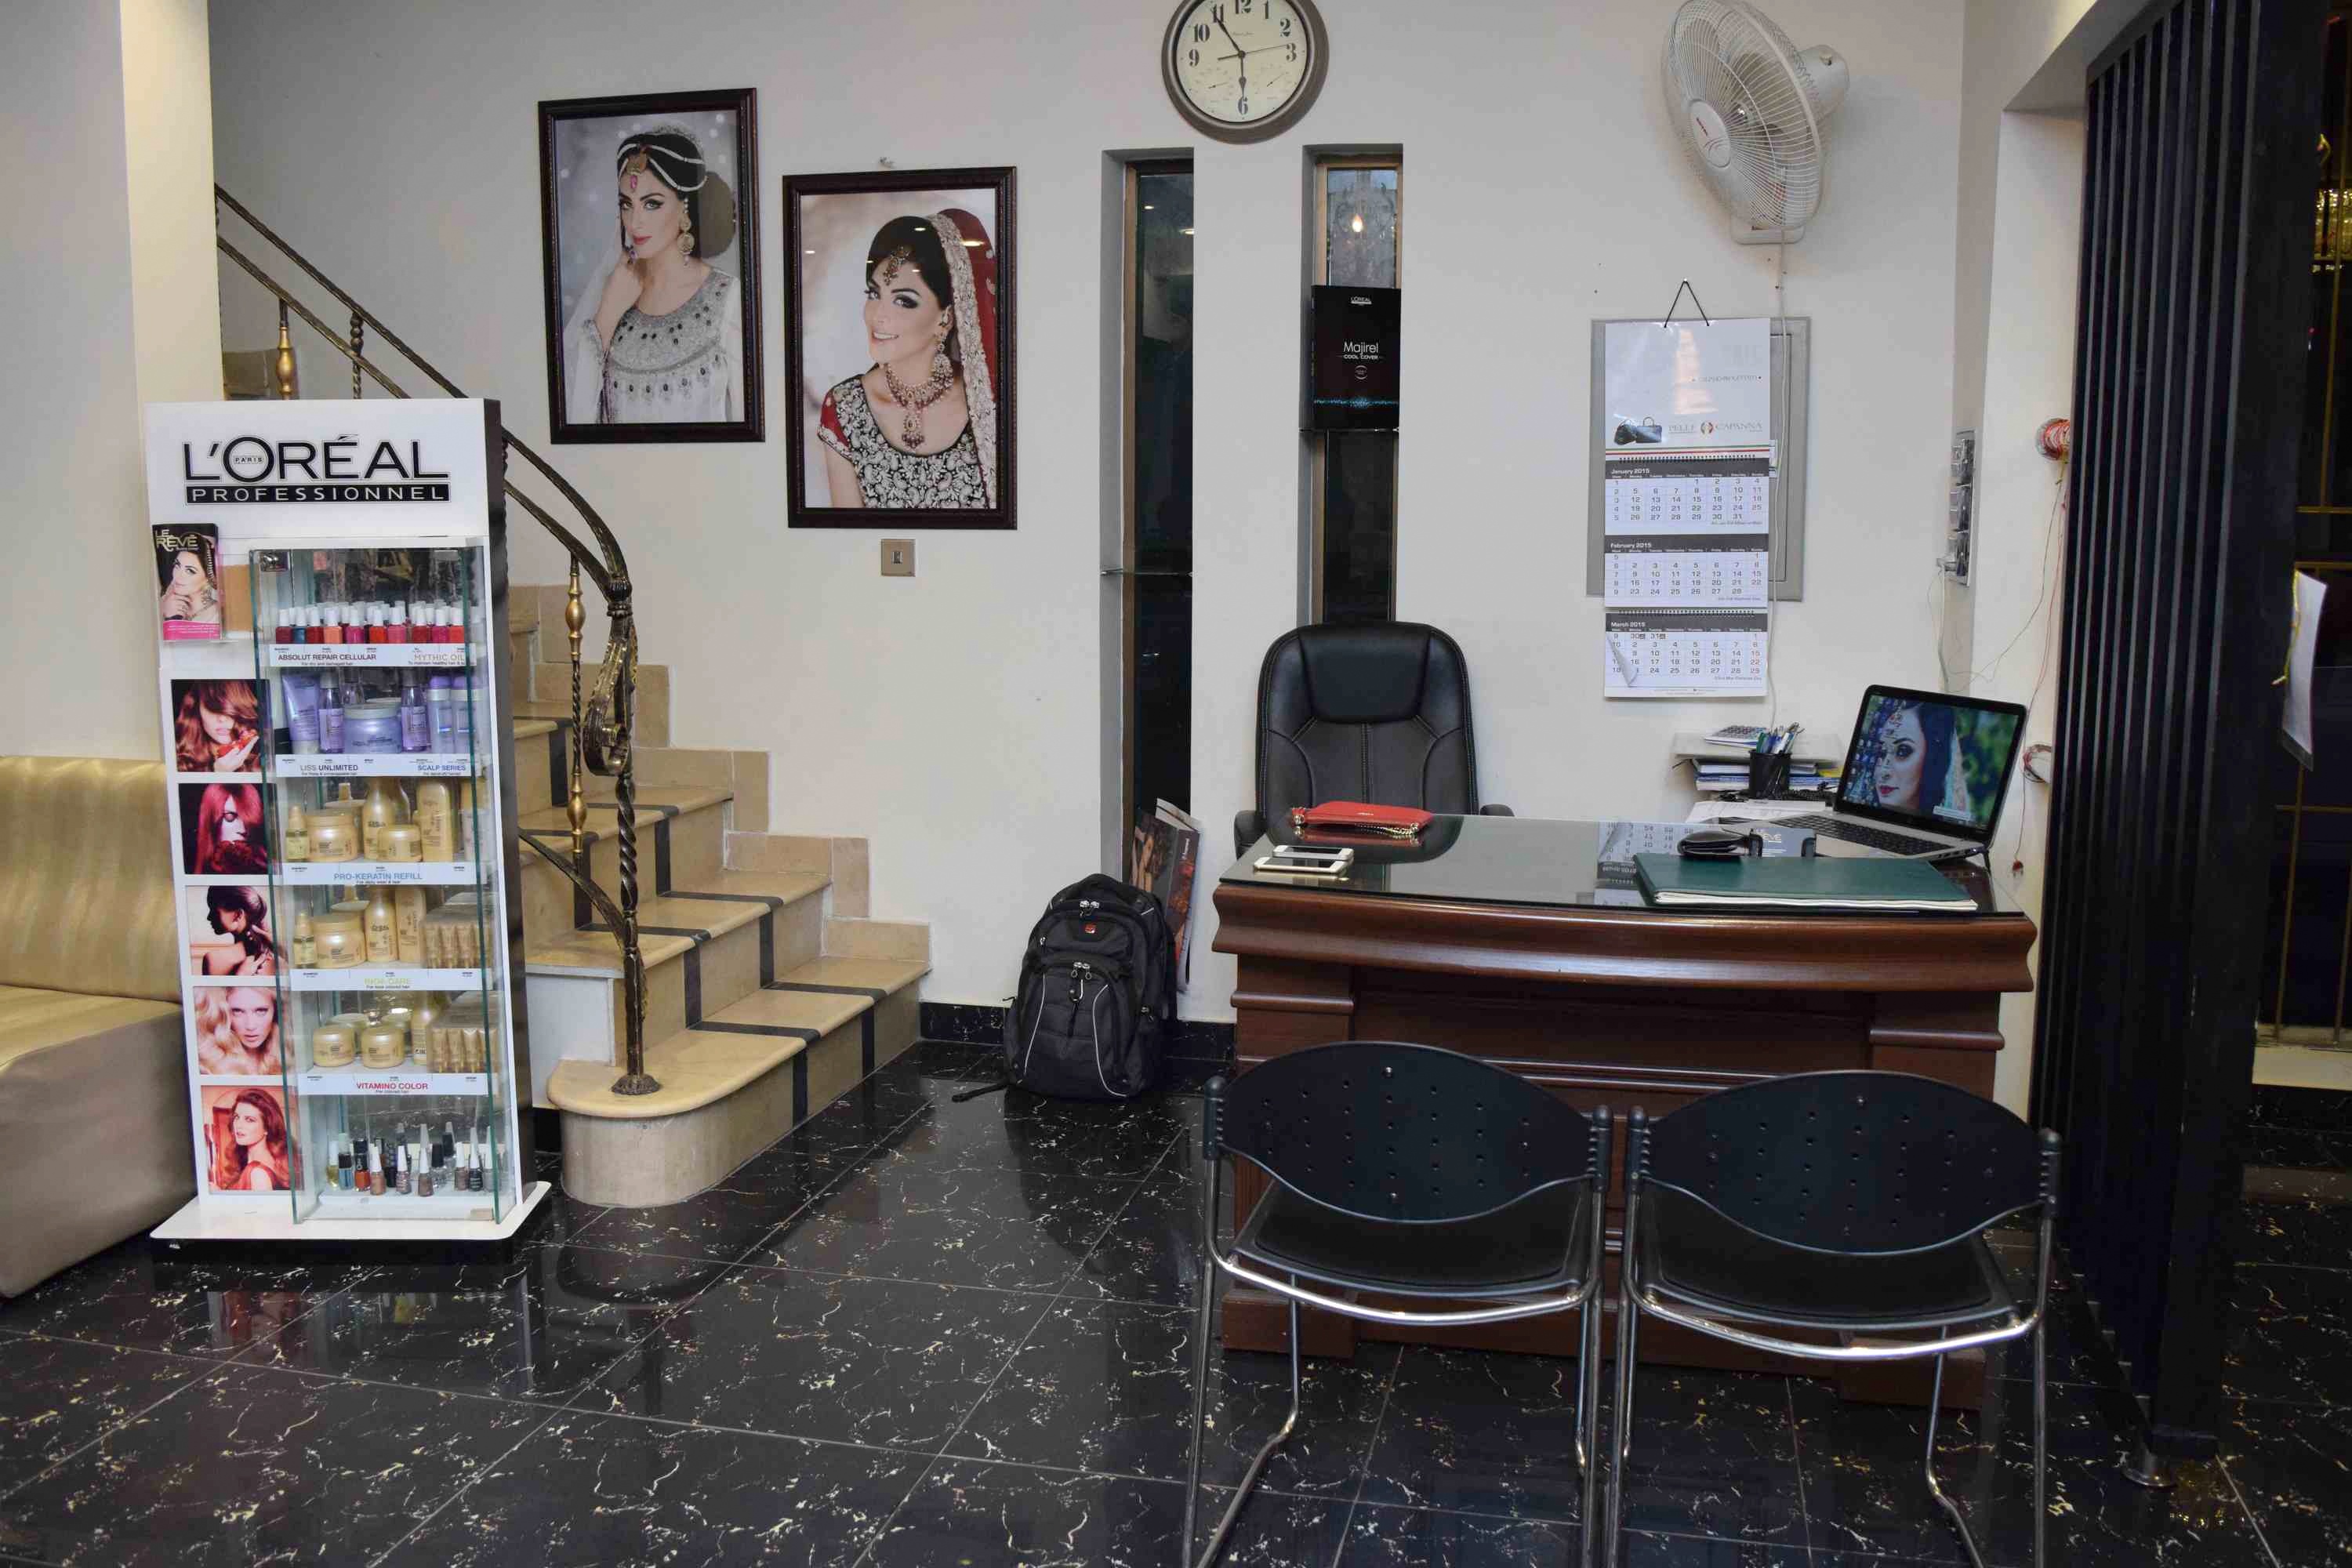 79% off, Rs 1599 only for Dermaclear Whitening Facial or Double Whitening Facial + Whitening Polisher + Whitening Manicure + Whitening Pedicure + Hair Cut with Hair Wash + Neck Shoulder Massage + Threading Eye brows upper lips at Le Reve Beauty Lounge Gulberg, Lahore